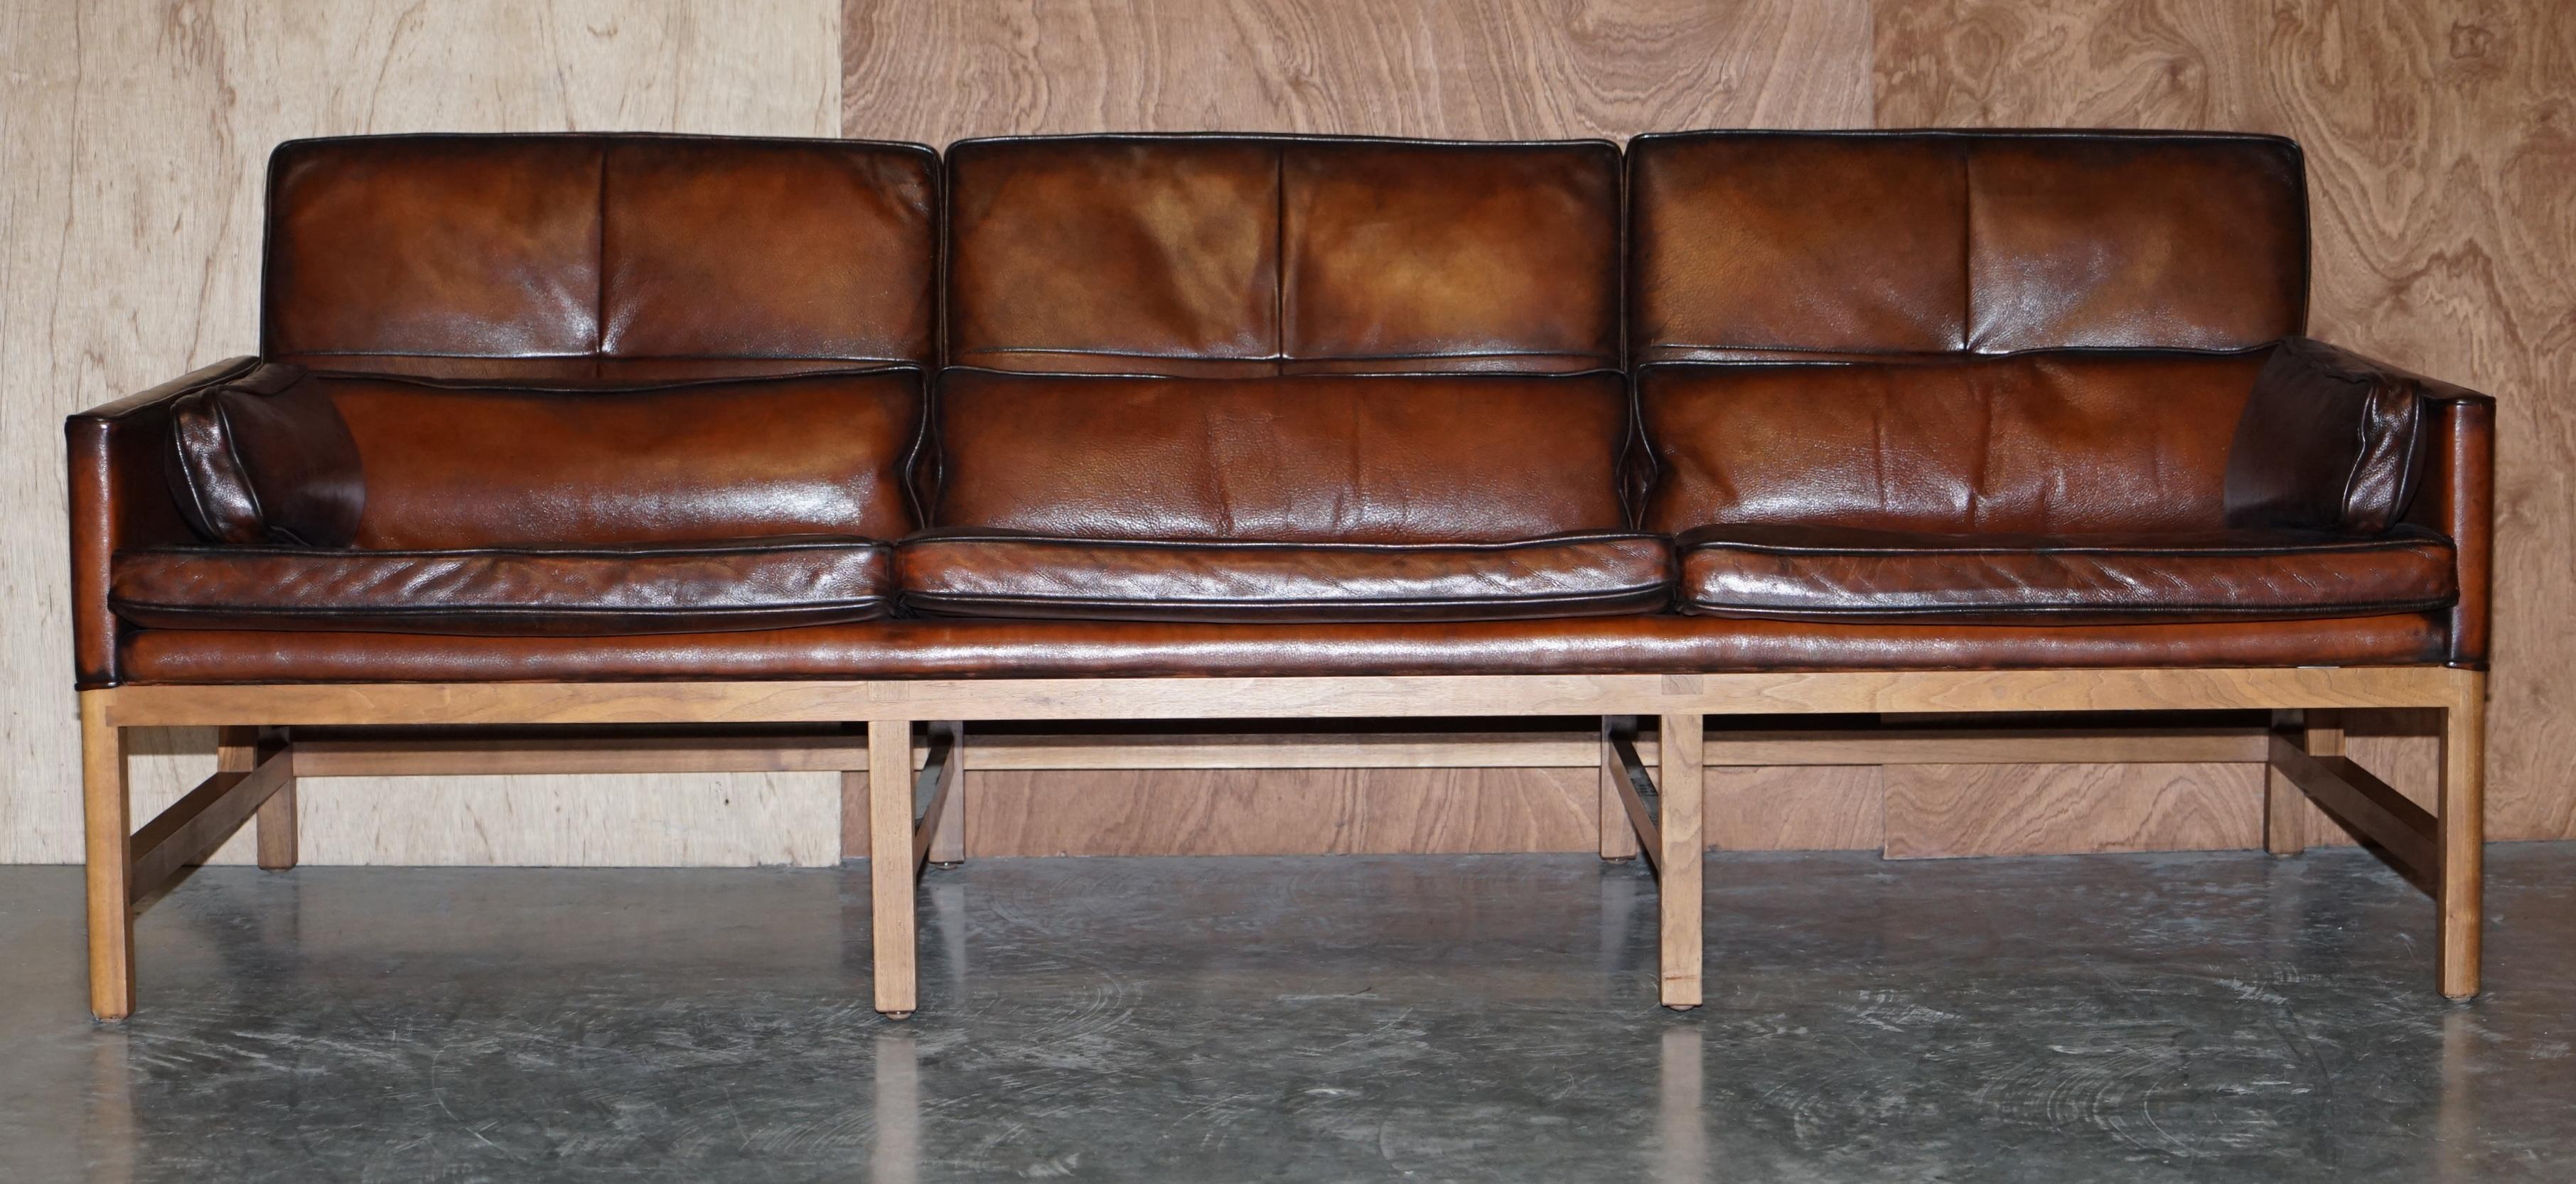 We are delighted to offer for sale this one of a kind finish BassamFellows CB-53 Low back three seat sofa designed by Crain Bassam

“Living in a glass house makes you design pieces to look immaculate from every angle,” says Craig Bassam, who